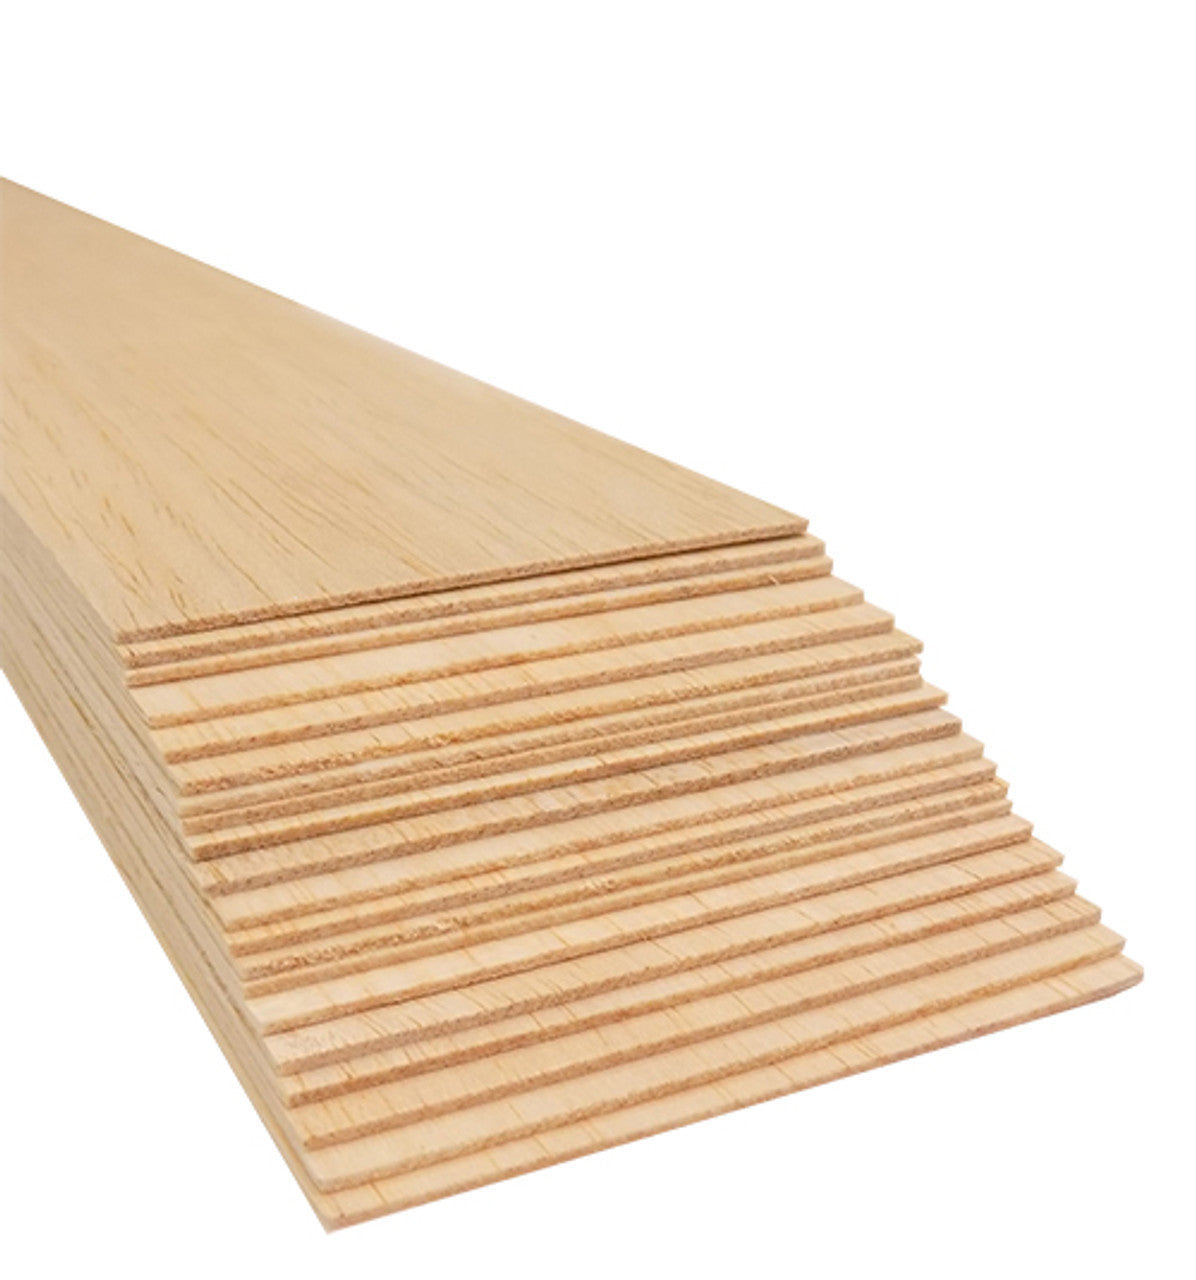 Basswood Sheets 1/32 x 3 x 24